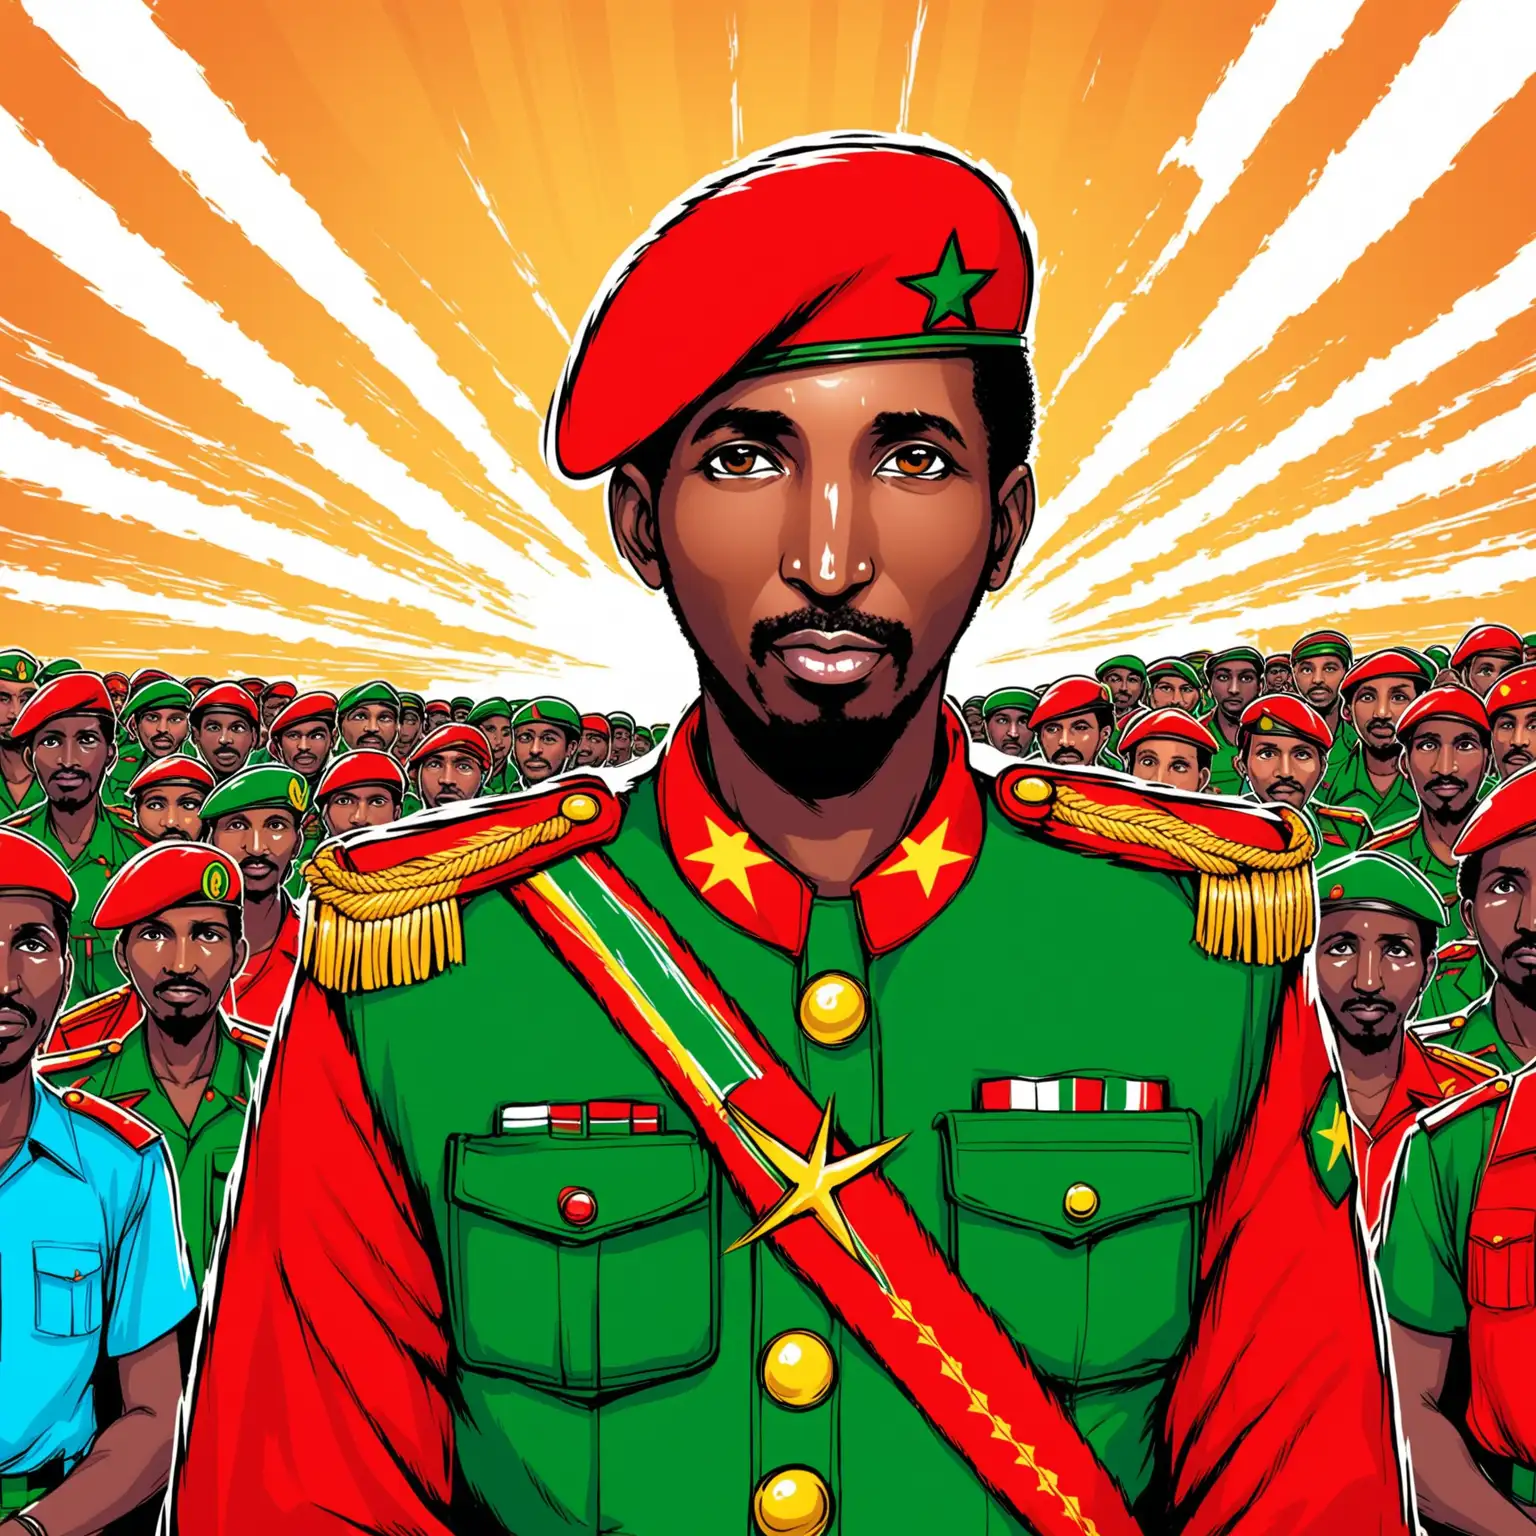 Illustrate an image of Thomas Sankara wanting to make the world a better place.
Cartoon version. Colourful.